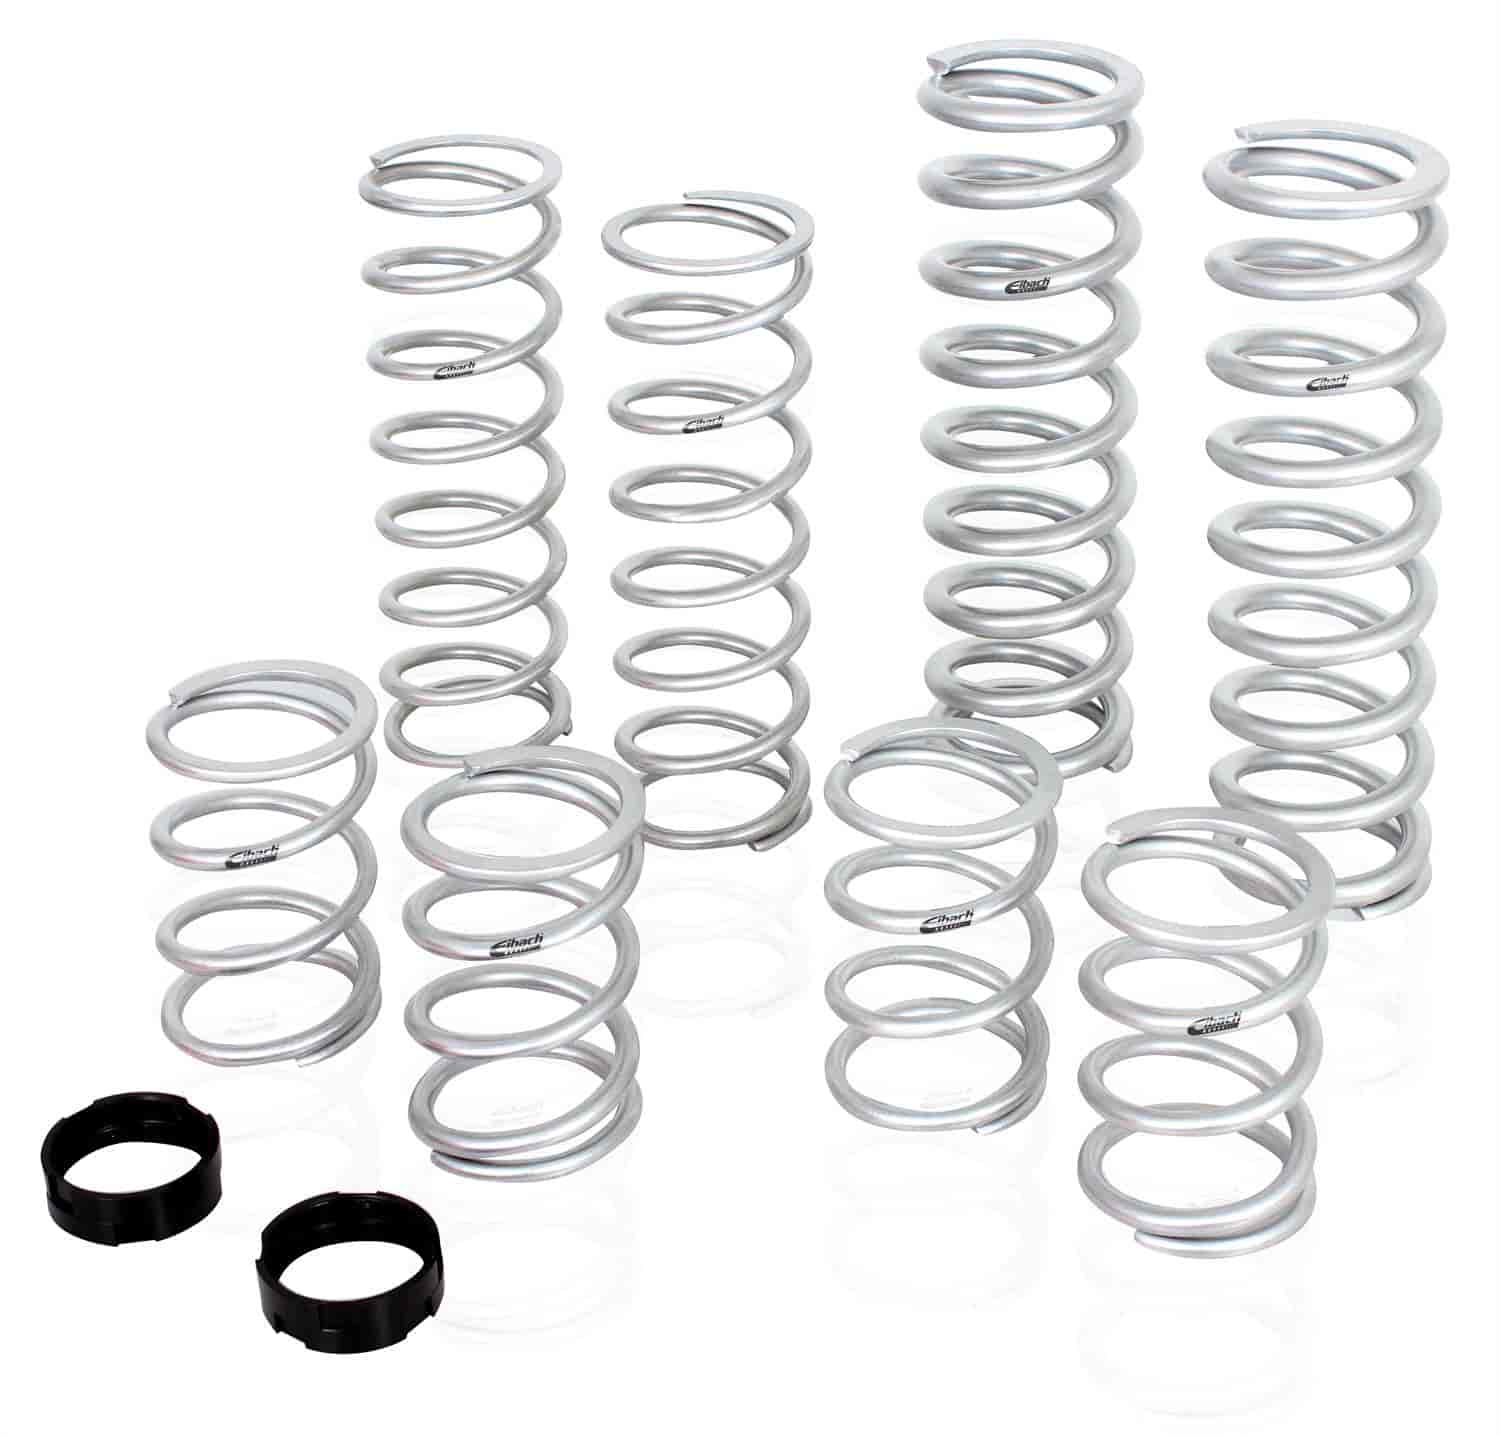 E85-212-003-02-22 Spring Kit Can-am Maverick Turbo 1000cc 2015 to 2016 2 Seater Stage 2 PERFORMANCE kit for OE Fox Sho